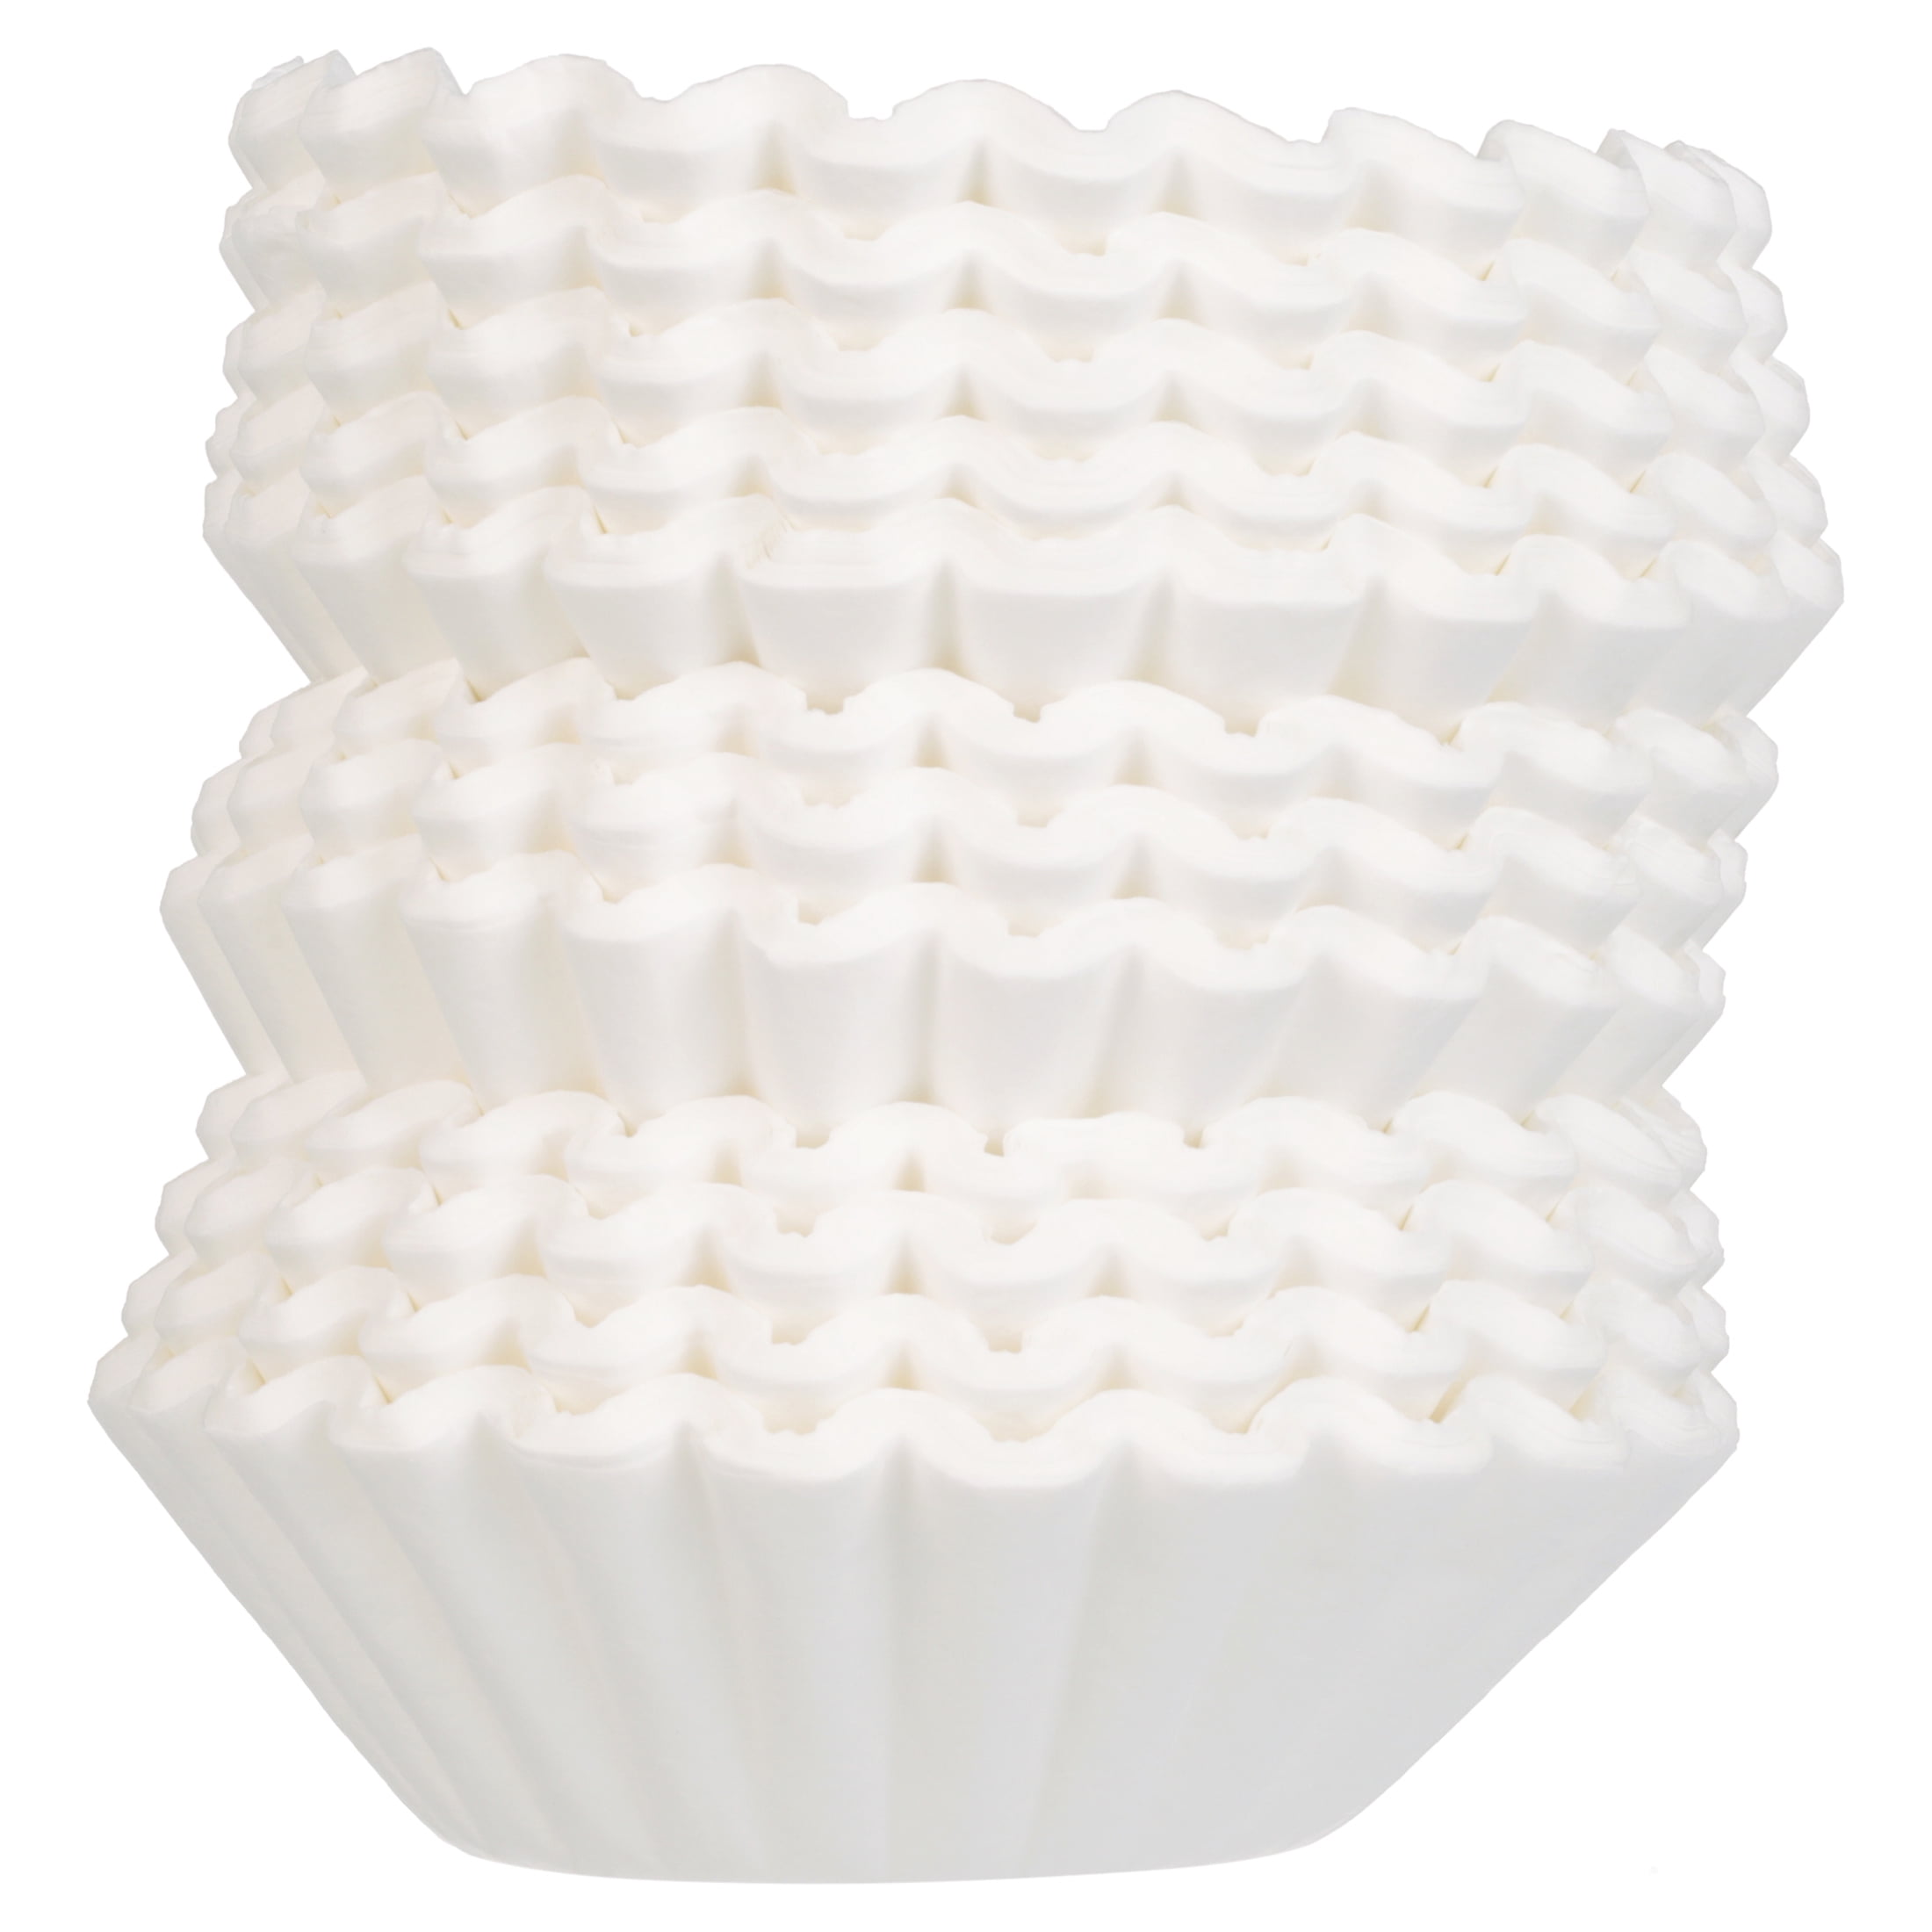 Tupkee Coffee Filters 8-12 Cups - 600 Count, Basket Style, Natural Bro